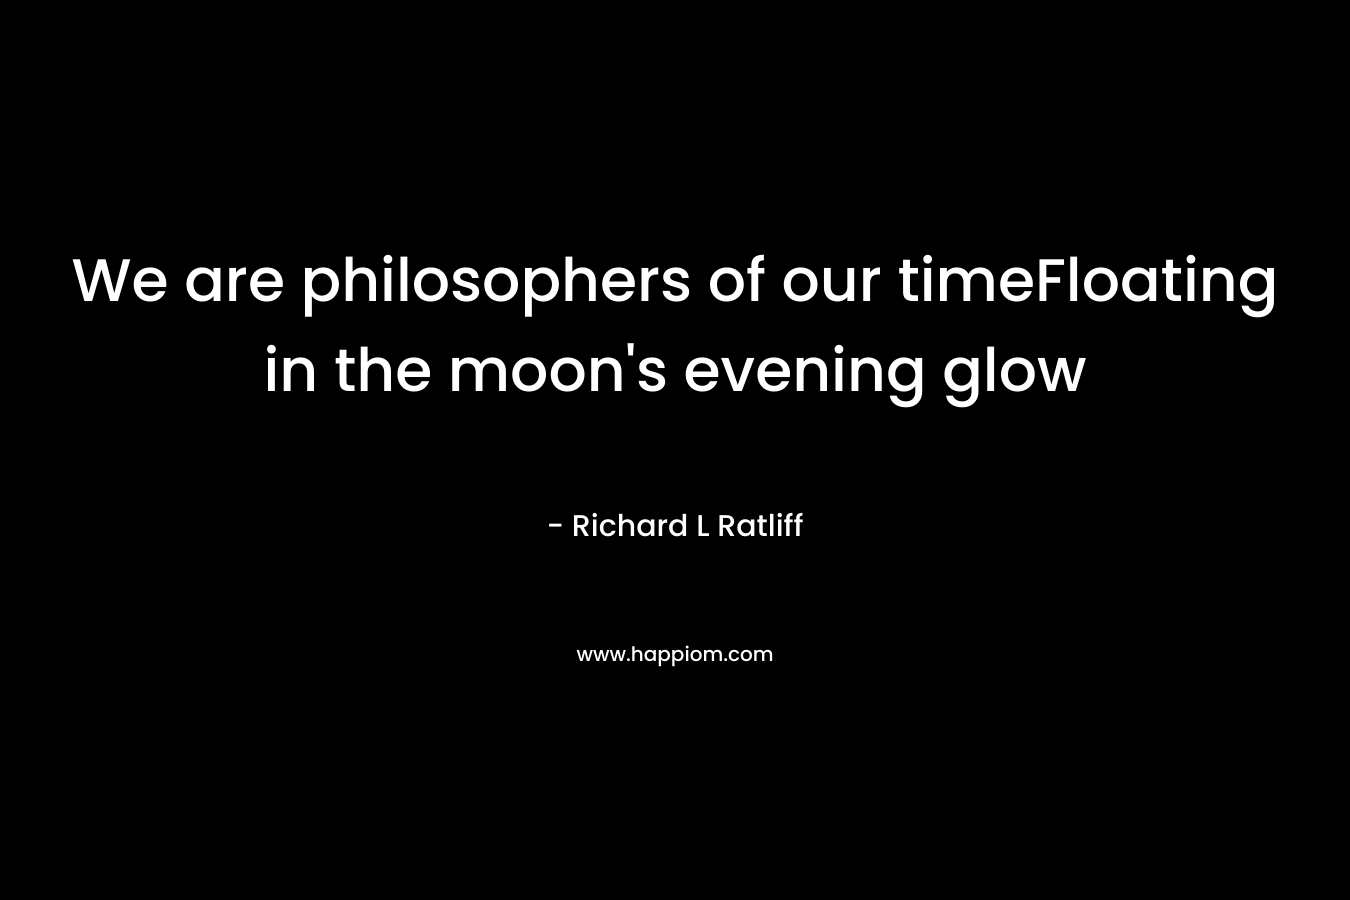 We are philosophers of our timeFloating in the moon's evening glow